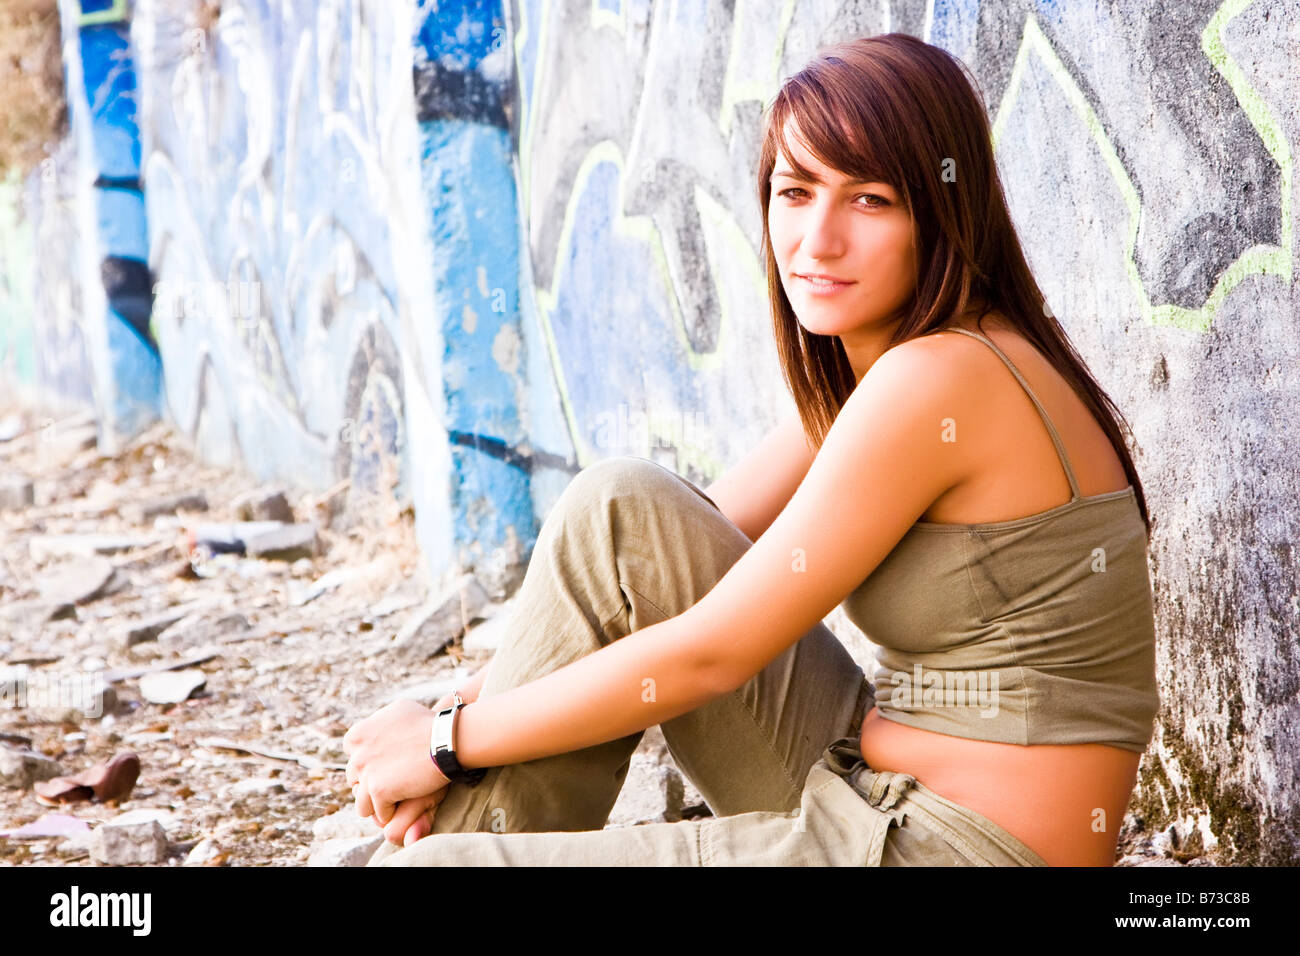 Young woman in casual clothing staring at camera Stock Photo